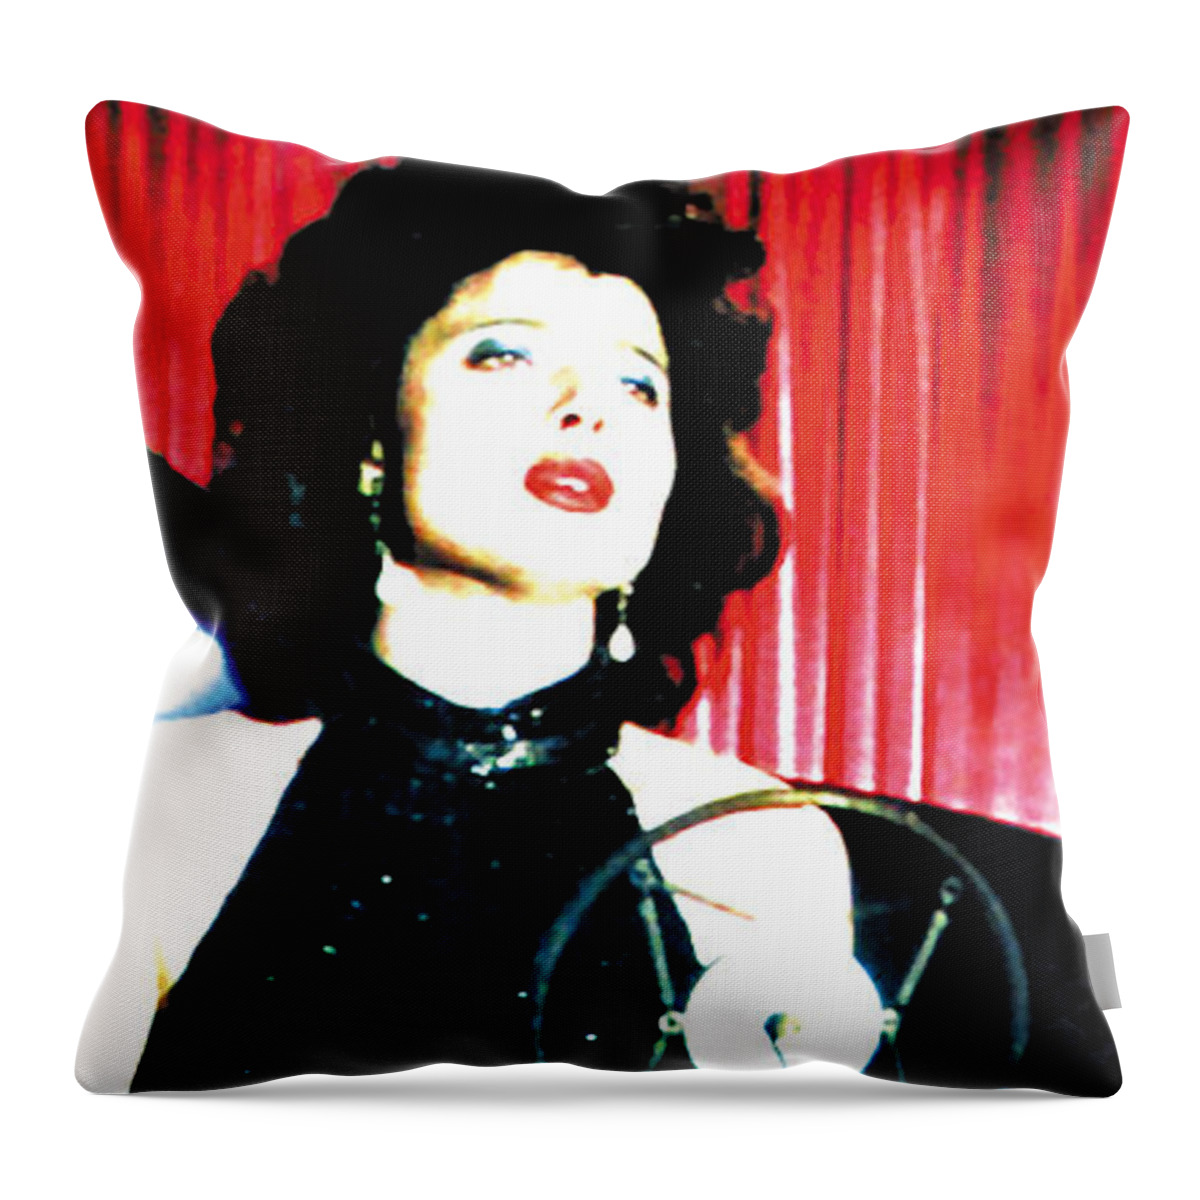 Blue Velvet Throw Pillow featuring the painting Blue Velvet 2013 by Twin Peaks